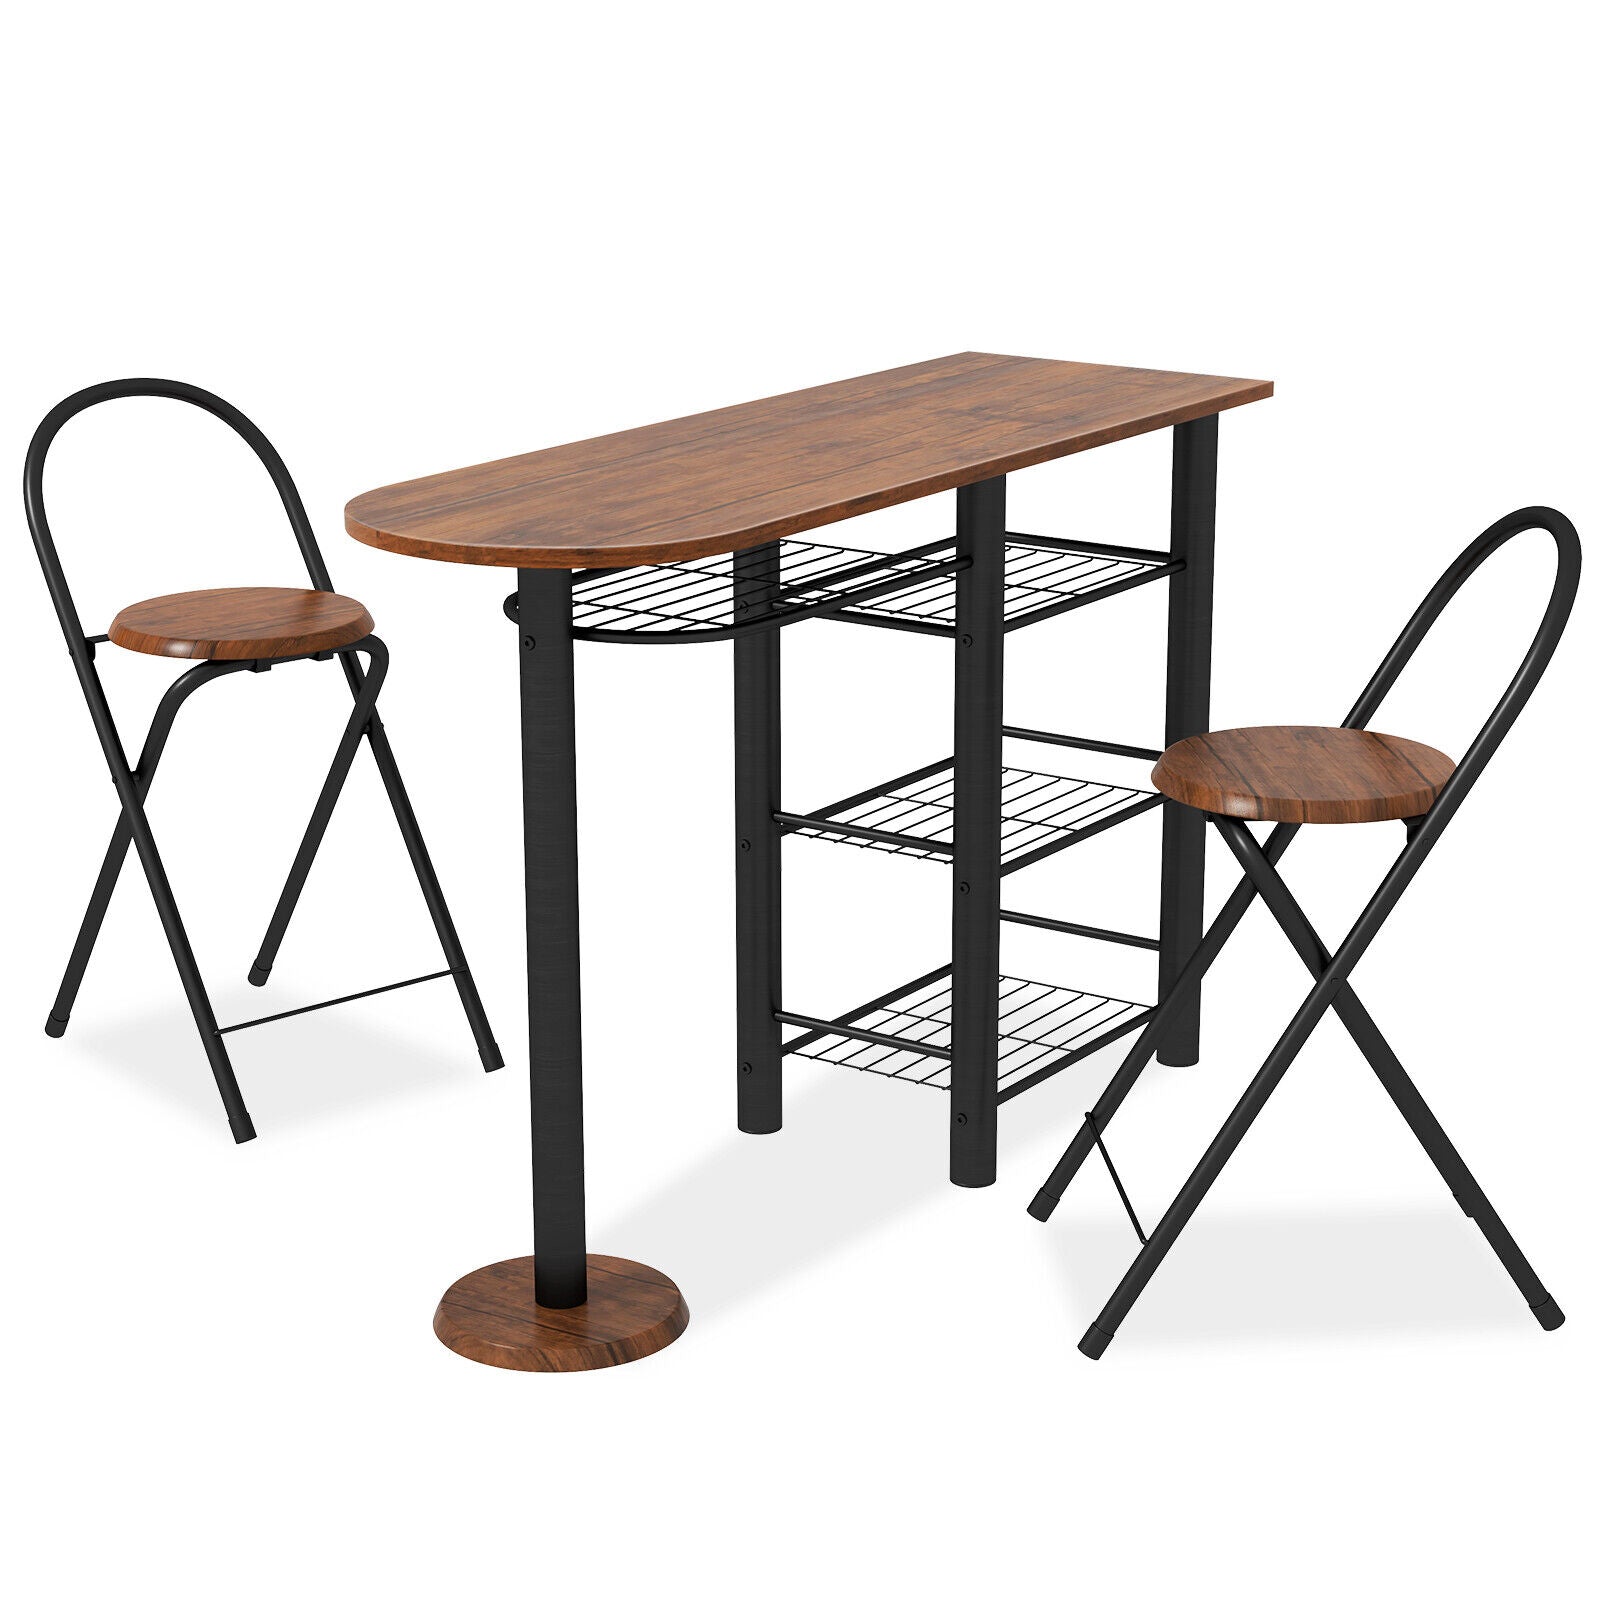 Dining Table Set of 3 - Kitchen Table Sets With Storage Shelf